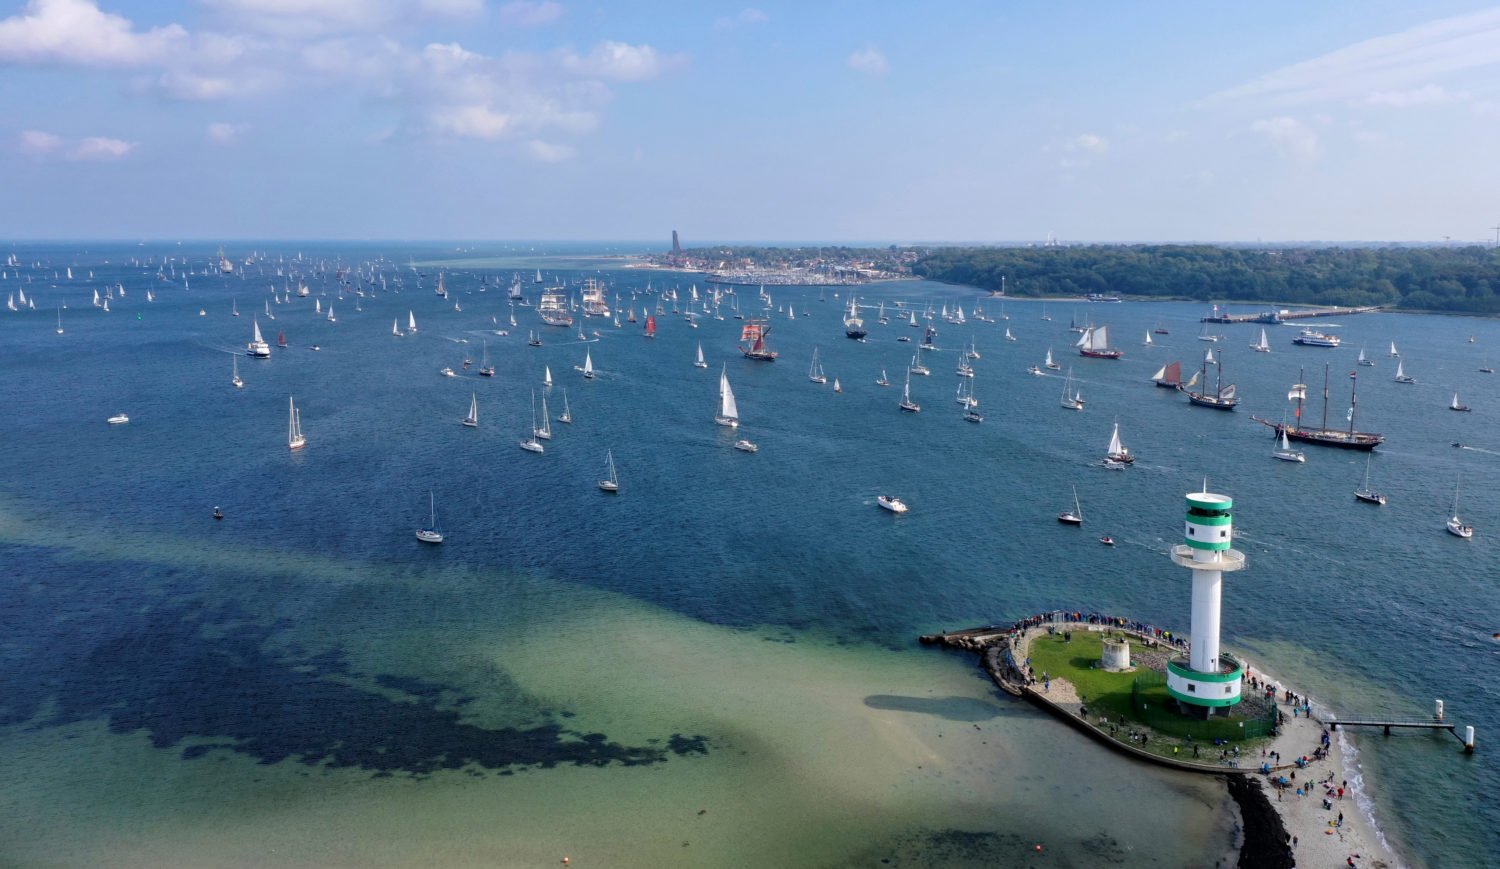 A parade of sails passes the Friedrichsort lighthouse